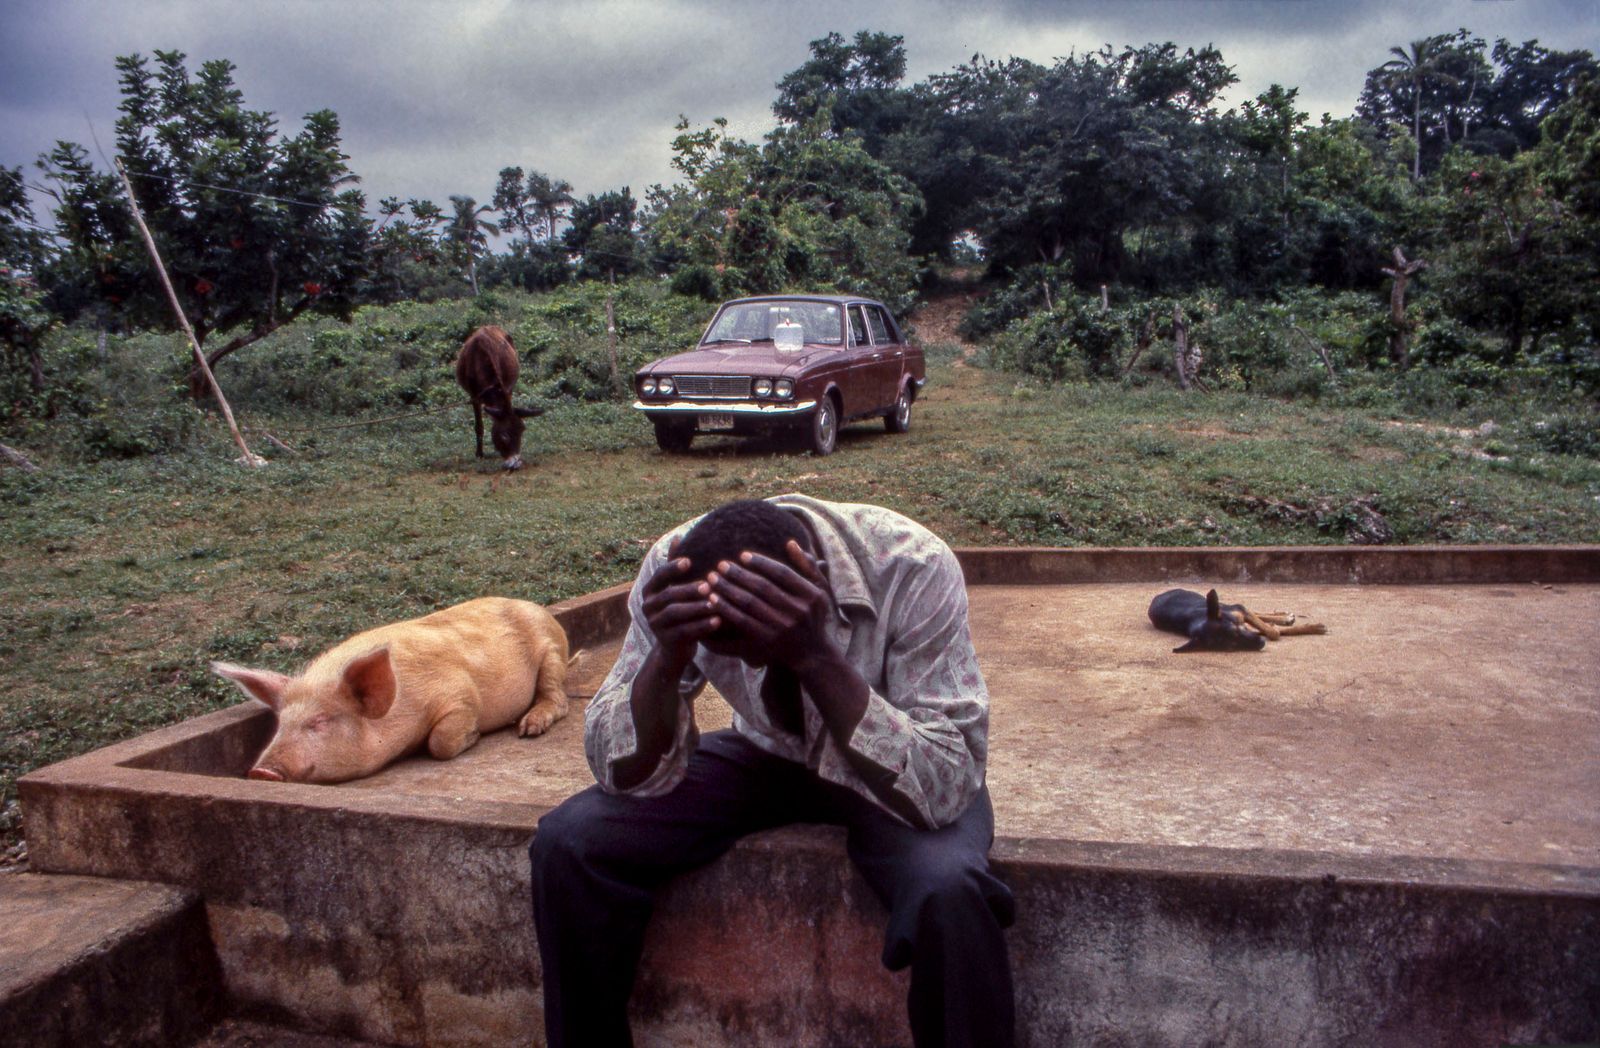 © Steven Edson - Despondent man with his hands to his head sitting net to a pet pig and dog. Ocho Rios, Jamaica